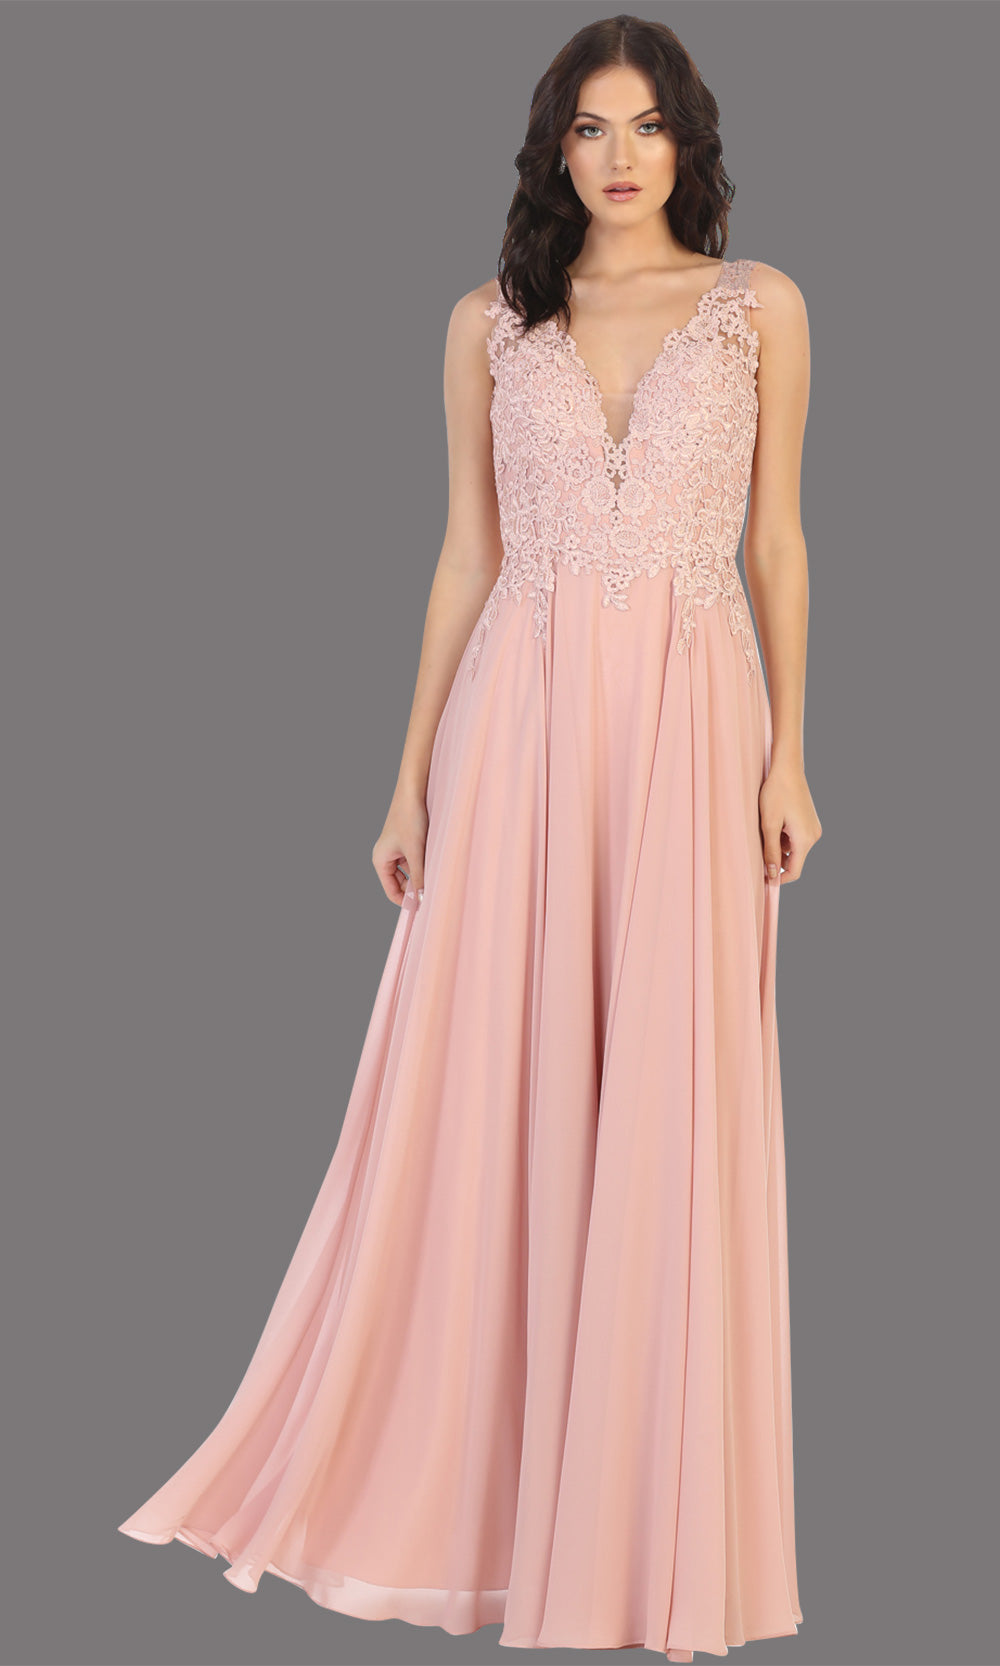 Mayqueen MQ1754 long dusty rose gold flowy sleek & sexy dress w/straps. This dusty rose dress is perfect for bridesmaid dresses, simple wedding guest dress, prom dress, gala, black tie wedding. Plus sizes are available, evening party dress.jpg